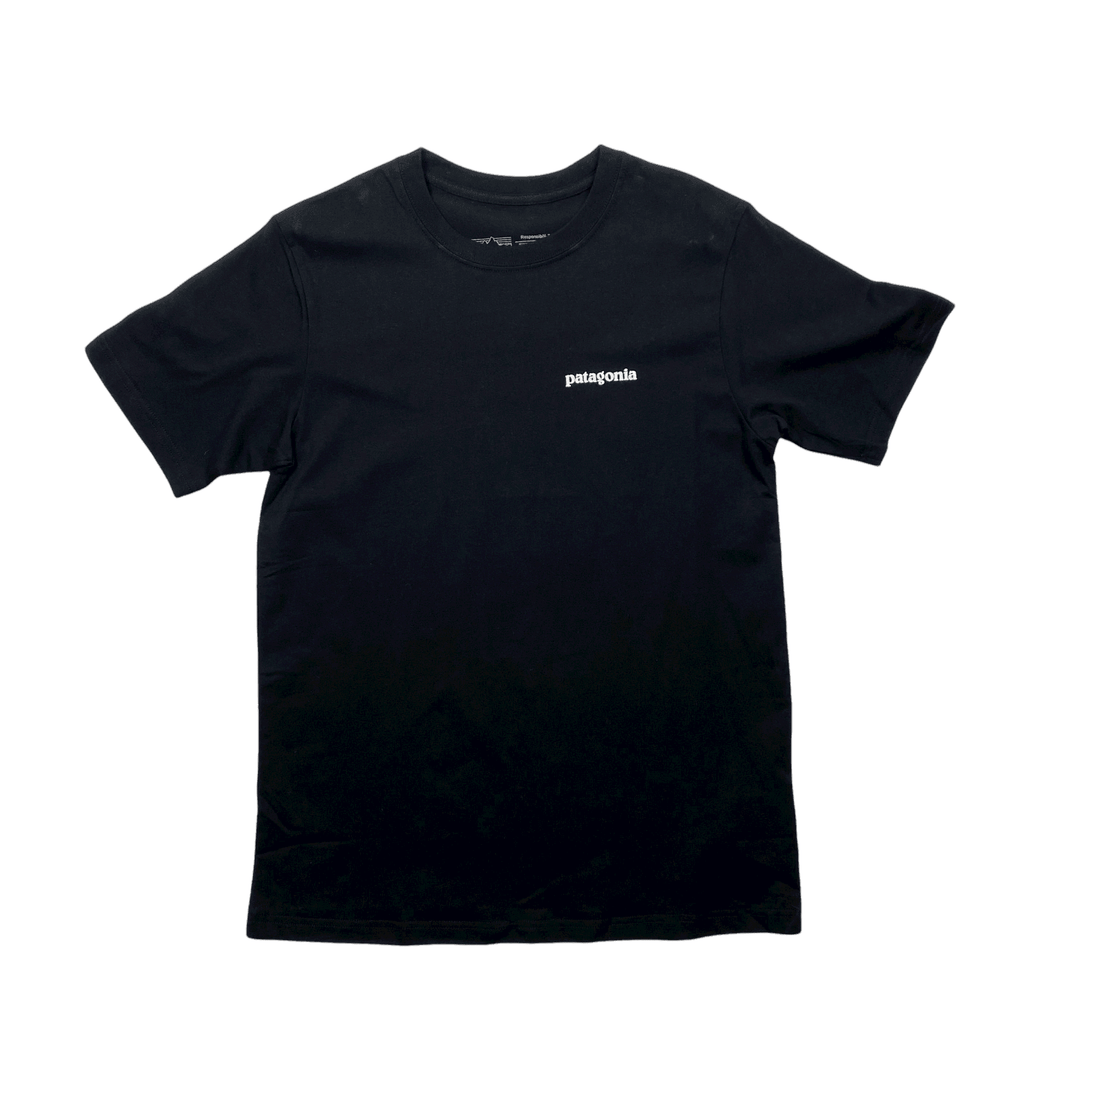 Black Patagonia Tee - Large (Recommended Size - Medium) - The Streetwear Studio